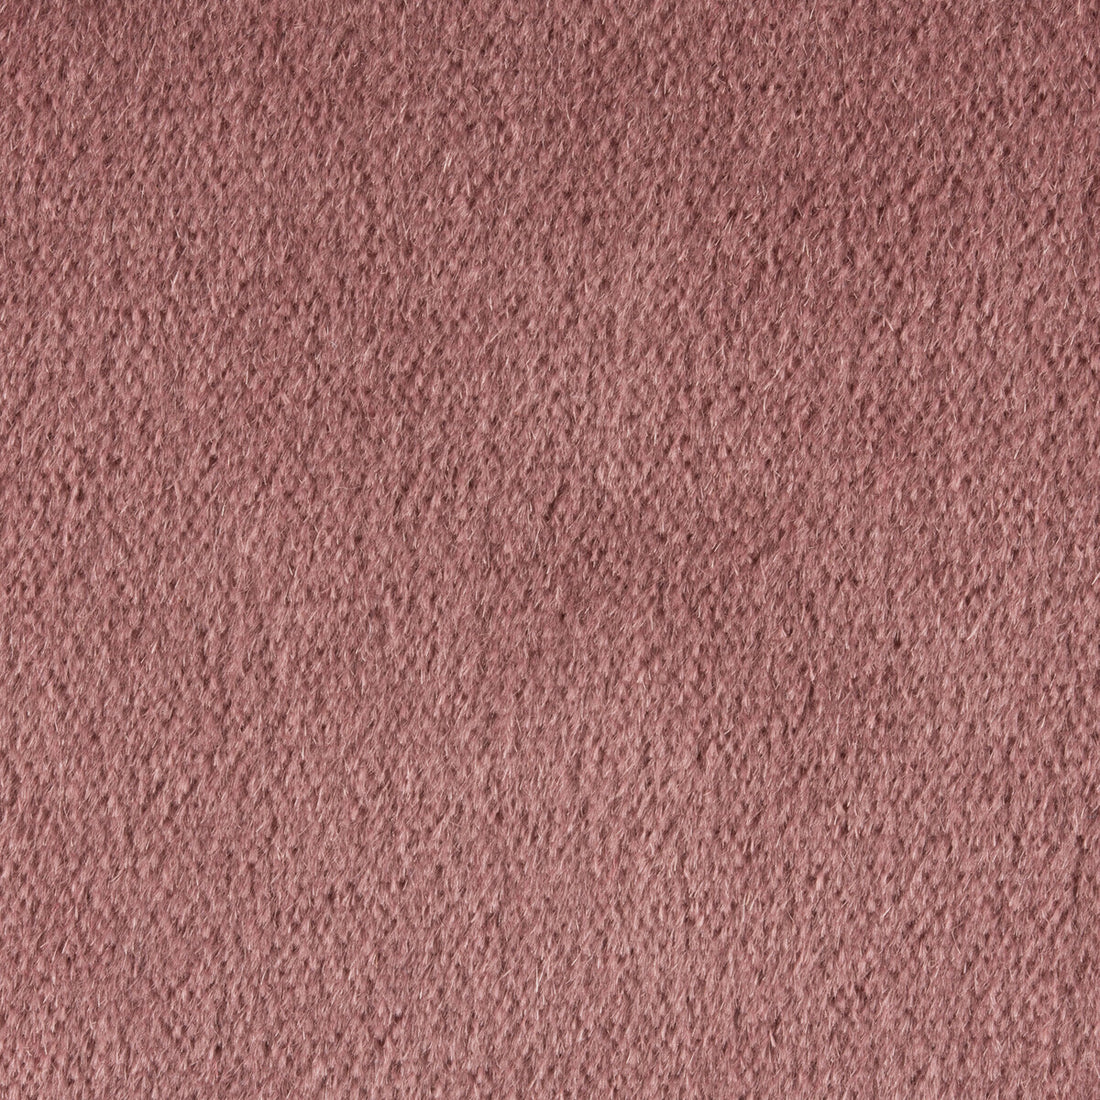 Autun Mohair Velvet fabric in heather color - pattern BR-89778.701.0 - by Brunschwig &amp; Fils